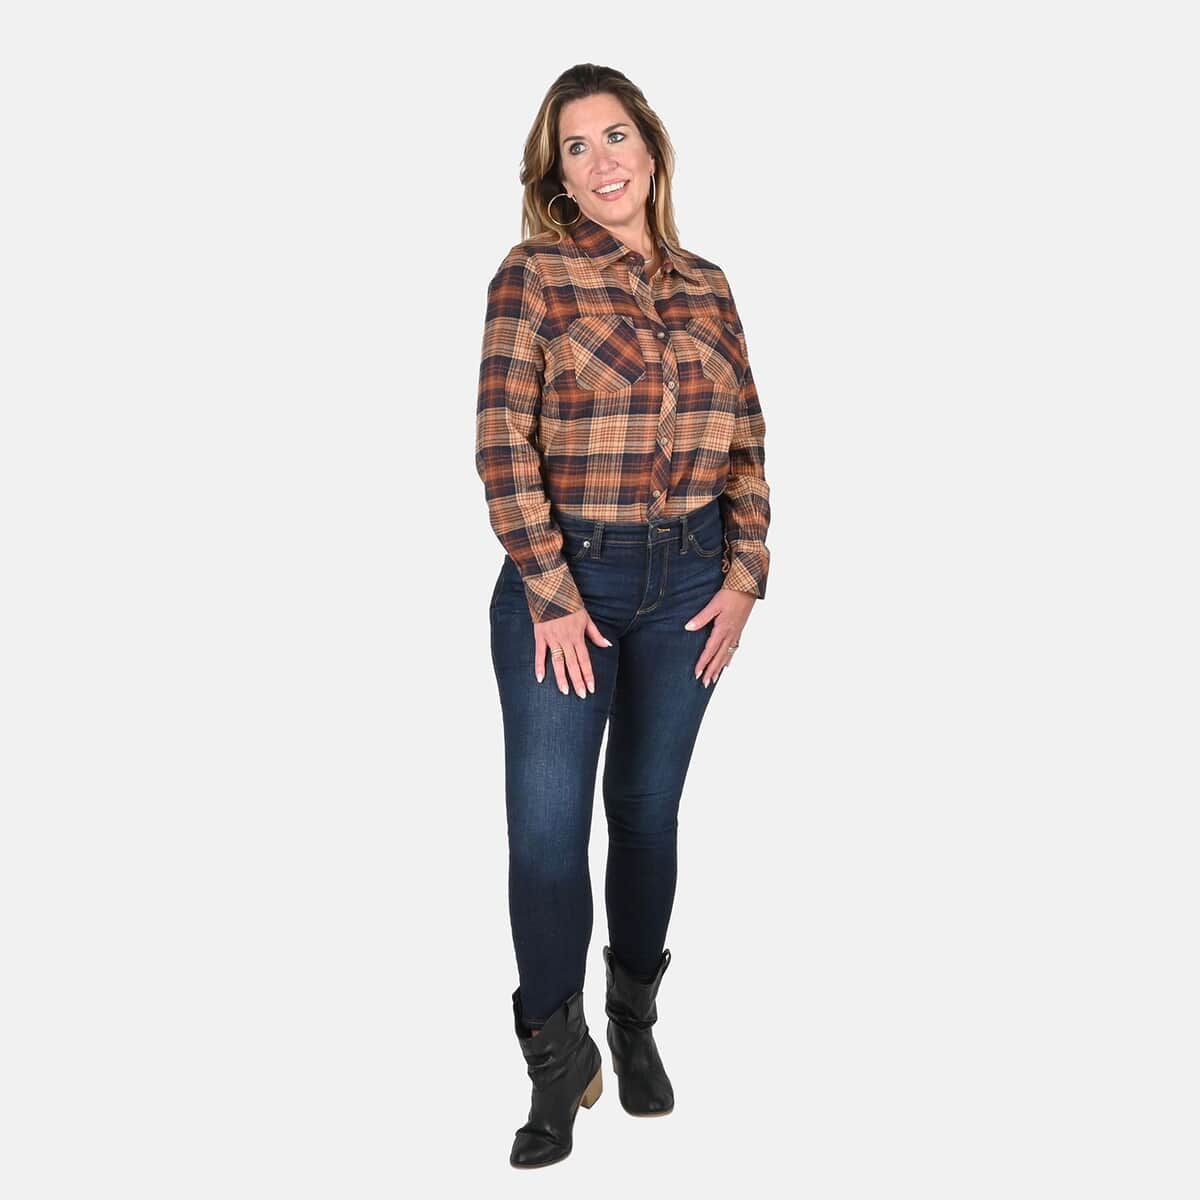 Victory Sportswear Tan and Black Plaid Pattern Cotton Flannel Shirt - S image number 0